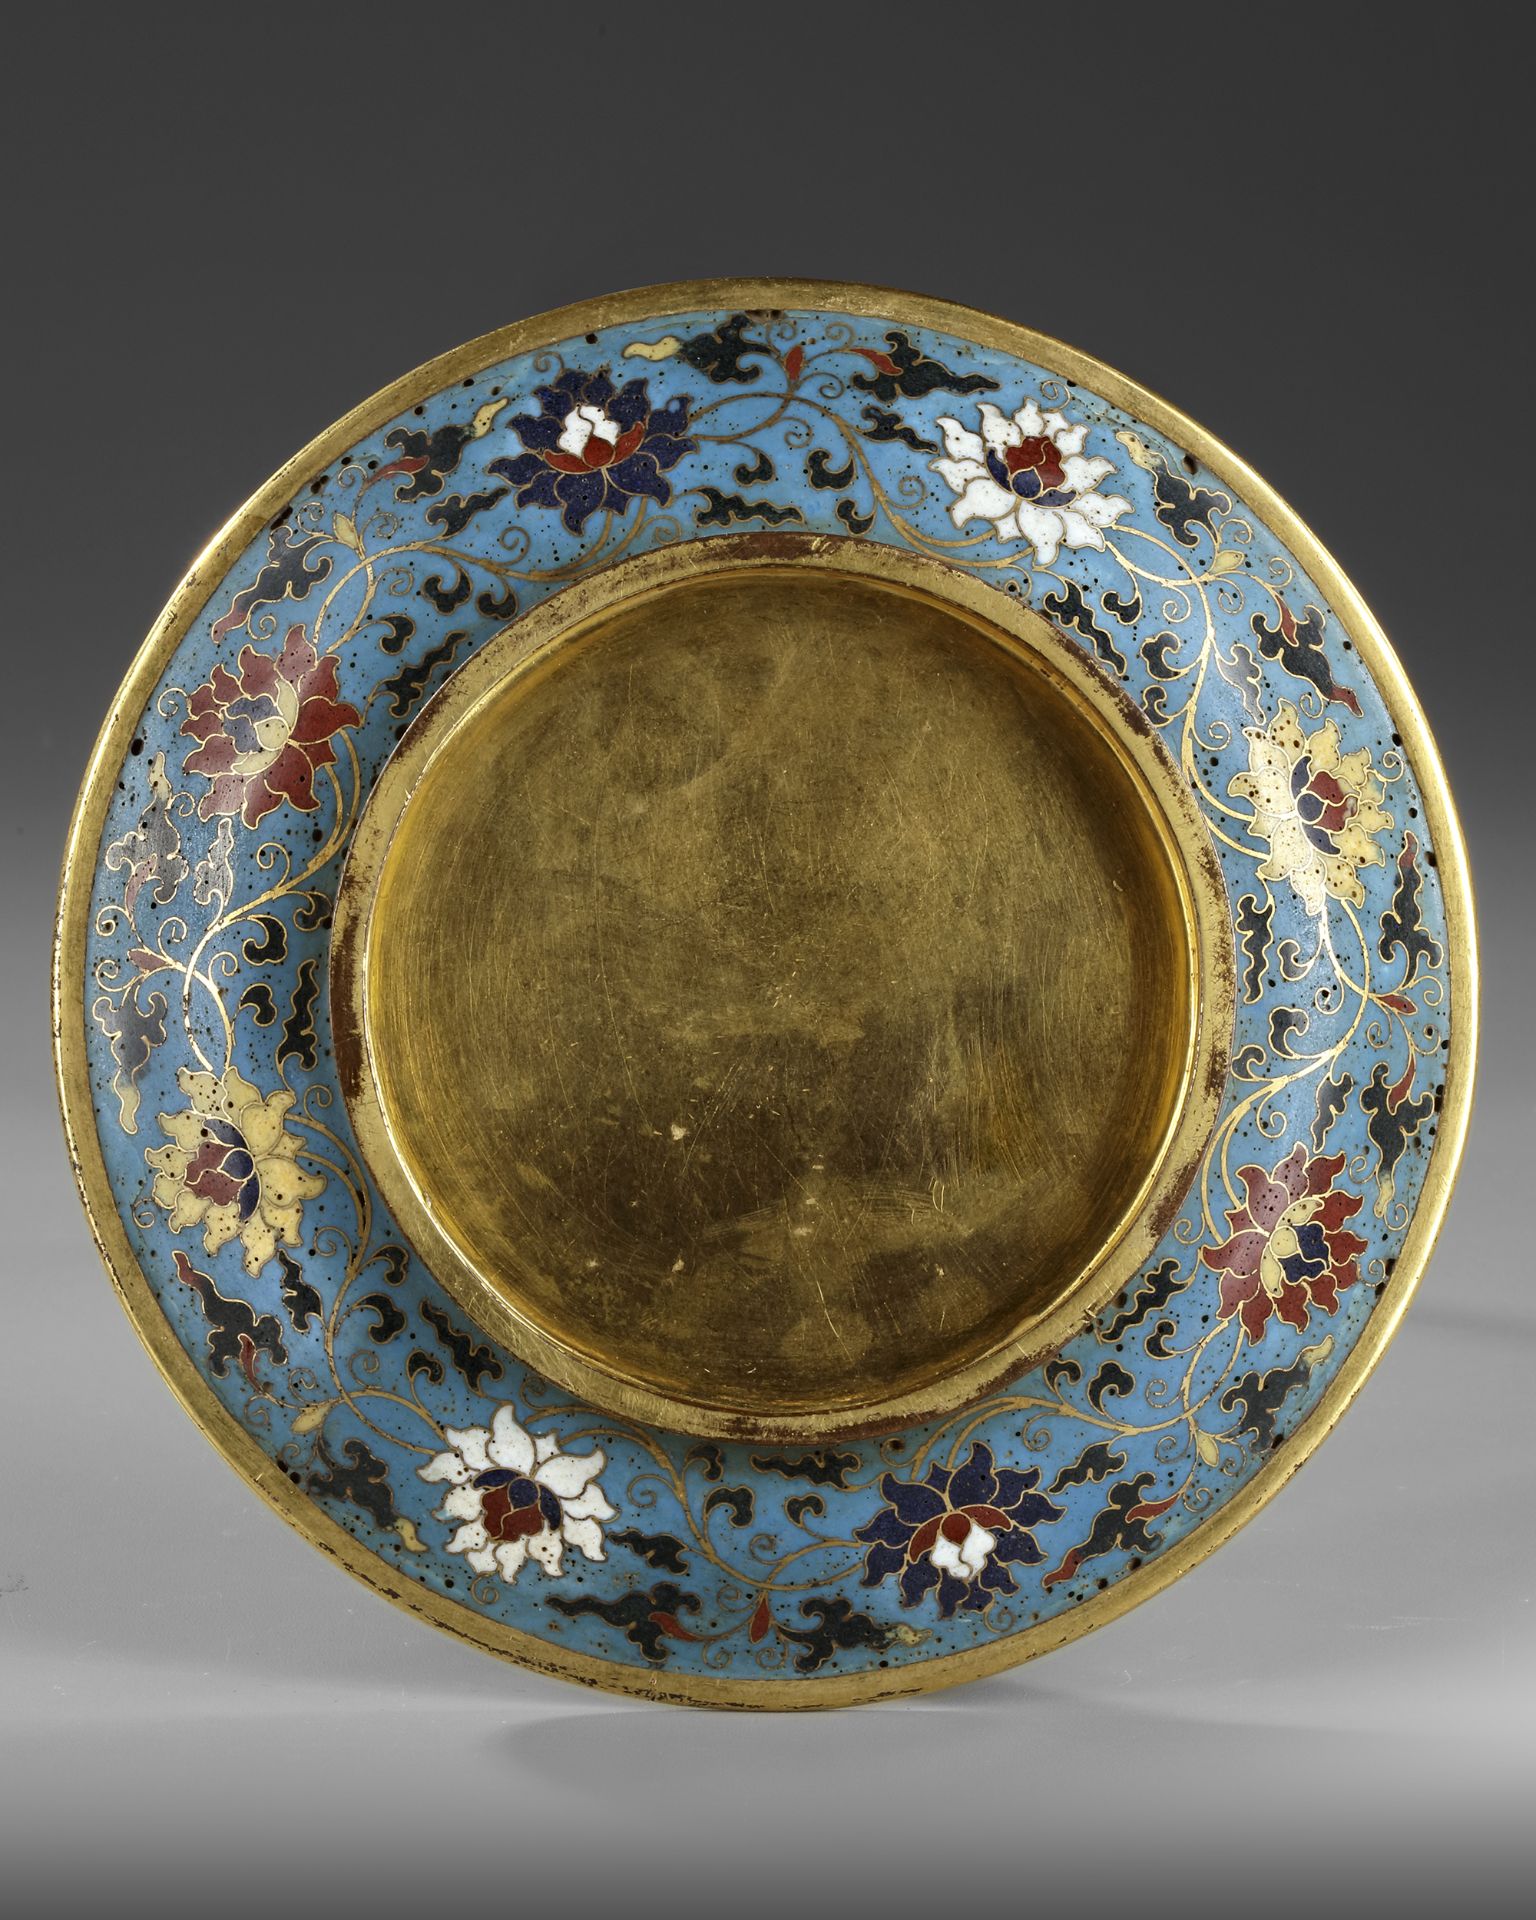 A CHINESE CLOISONNE ENAMEL DISH, QING DYNASTY (1644–1911) - Image 3 of 4